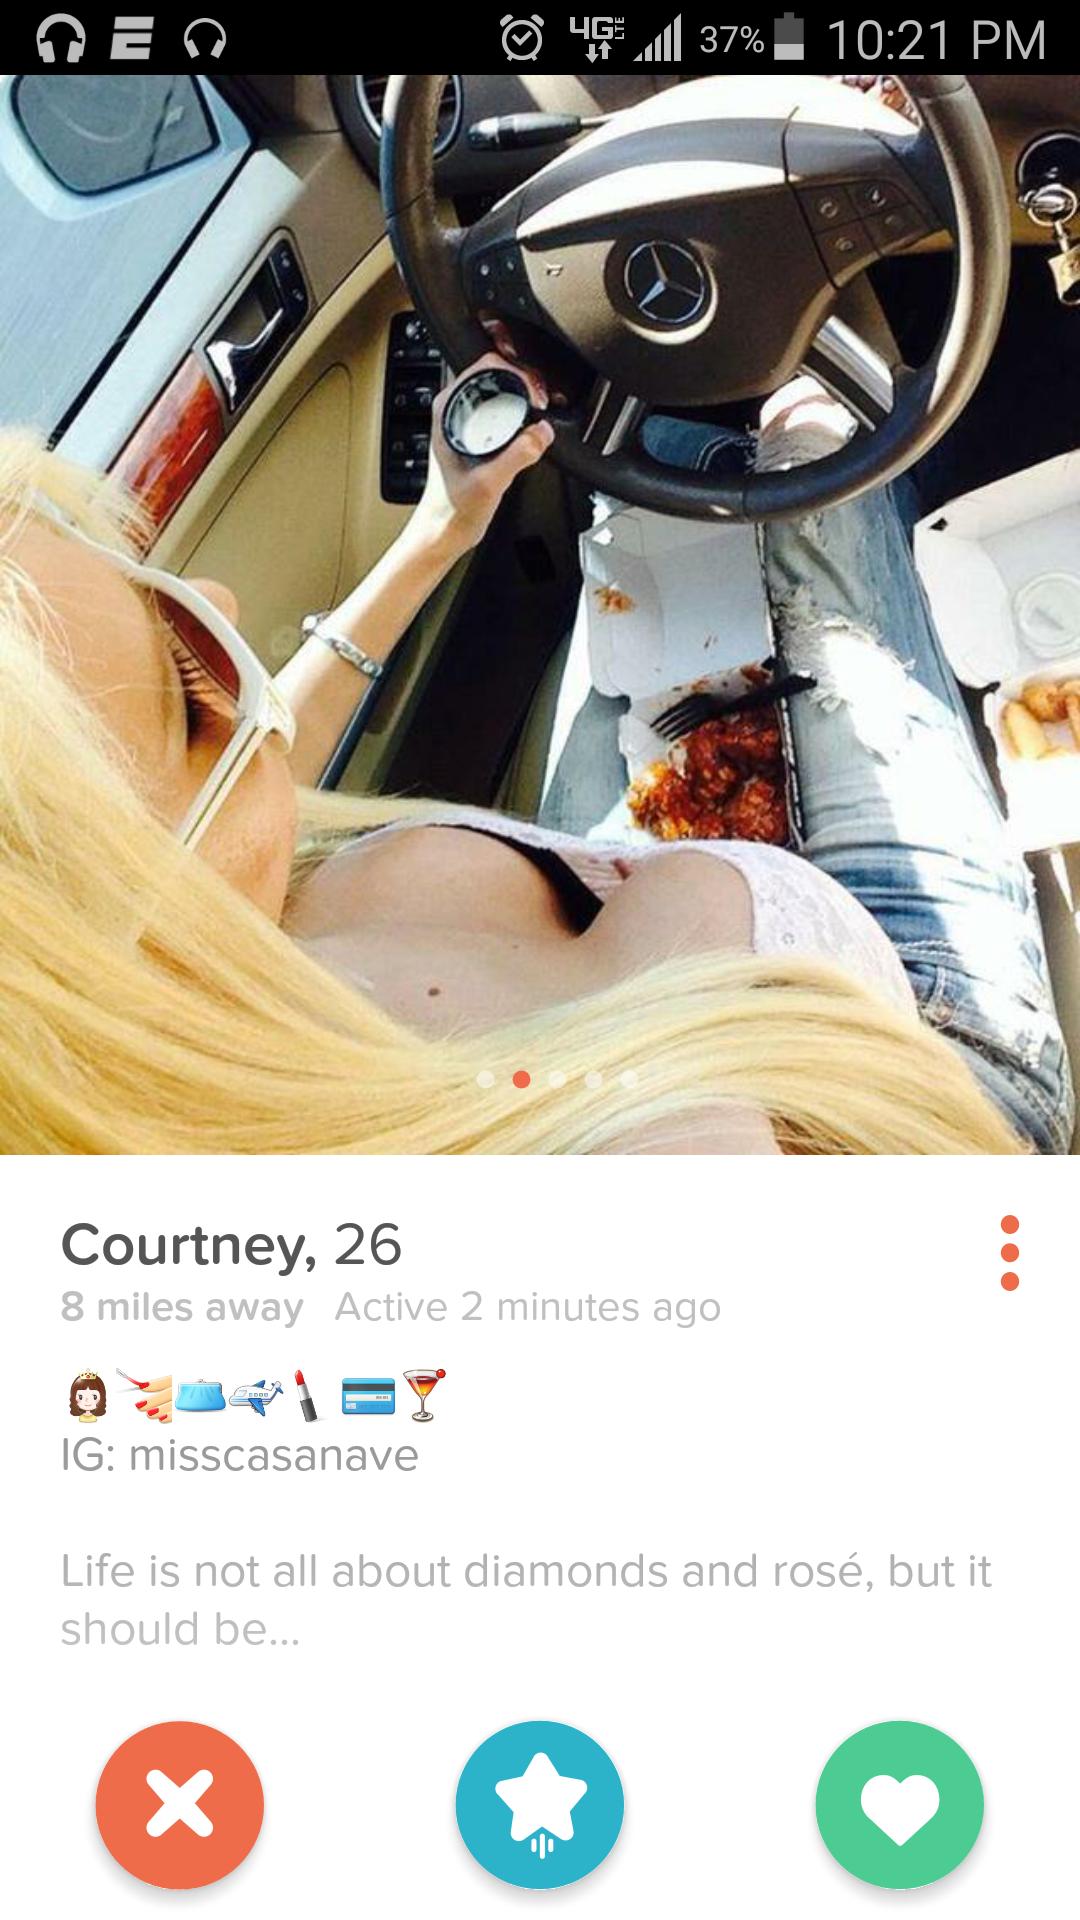 tinder - poster - De 0 49 11 37%. Courtney, 26 8 miles away Active 2 minutes ago Ig misscasanave Life is not all about diamonds and ros, but it should be...